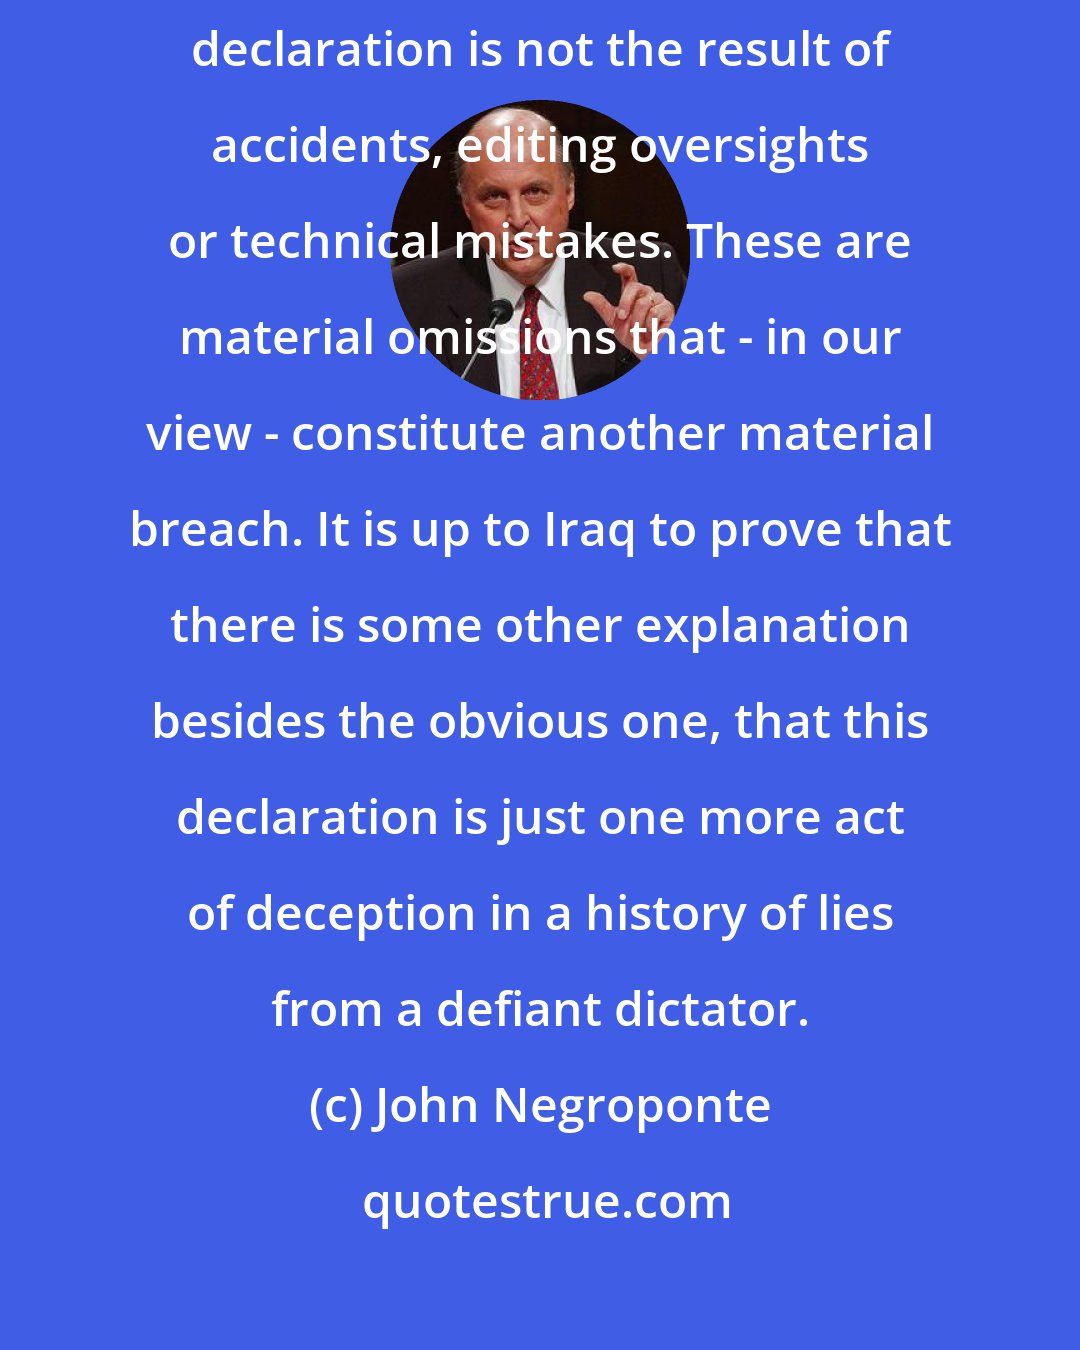 John Negroponte: It should be obvious that this pattern of systematic holes and gaps in Iraq's declaration is not the result of accidents, editing oversights or technical mistakes. These are material omissions that - in our view - constitute another material breach. It is up to Iraq to prove that there is some other explanation besides the obvious one, that this declaration is just one more act of deception in a history of lies from a defiant dictator.